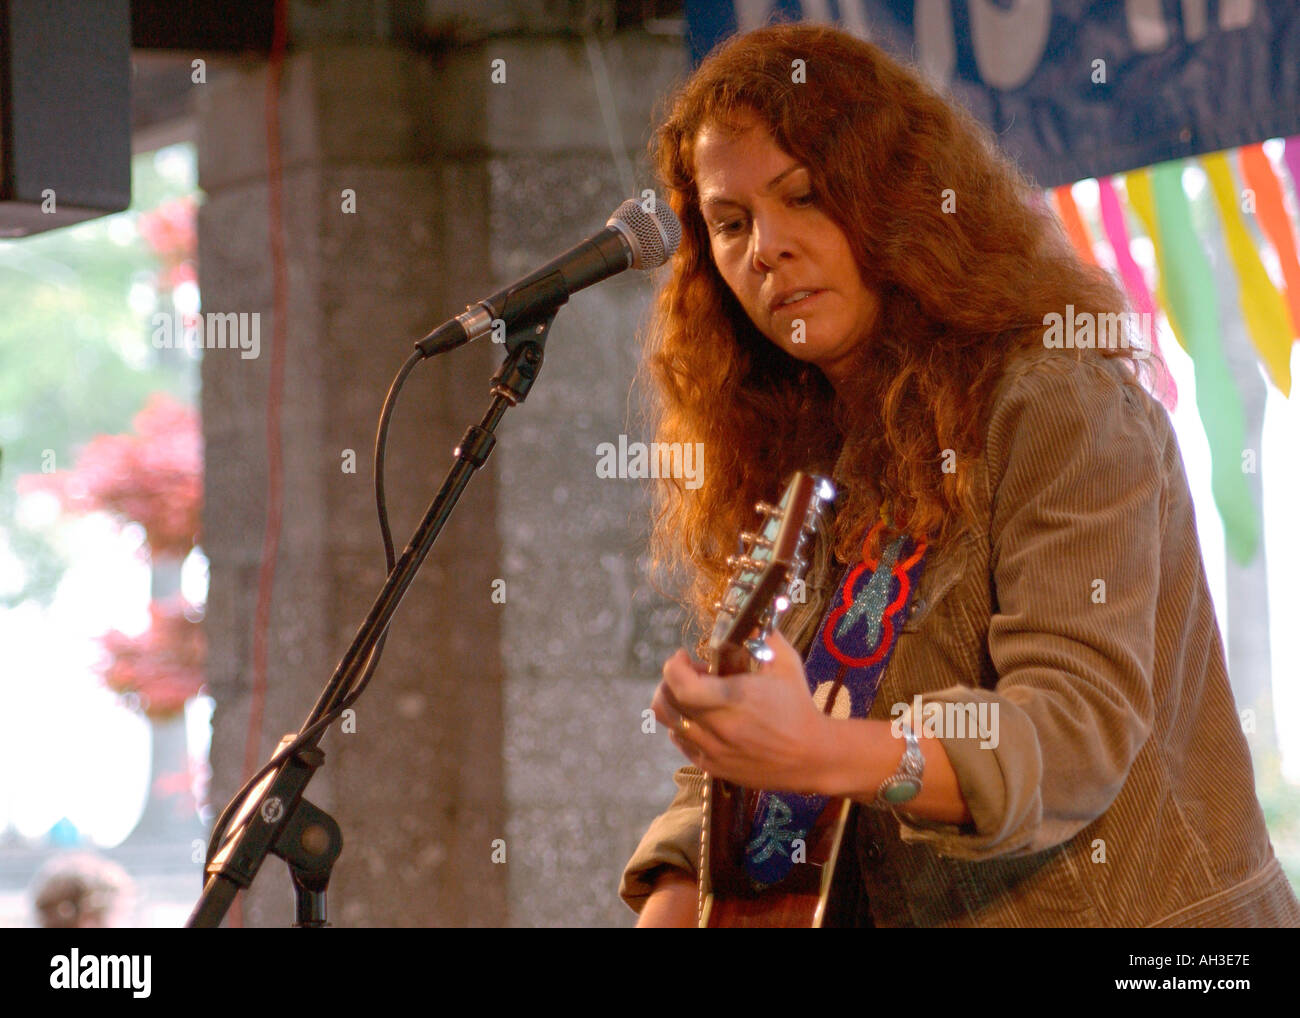 Sultry Female Singer and Guitar Player Rebecca Folson at Outdoor Festival Editorial Use USA Stock Photo